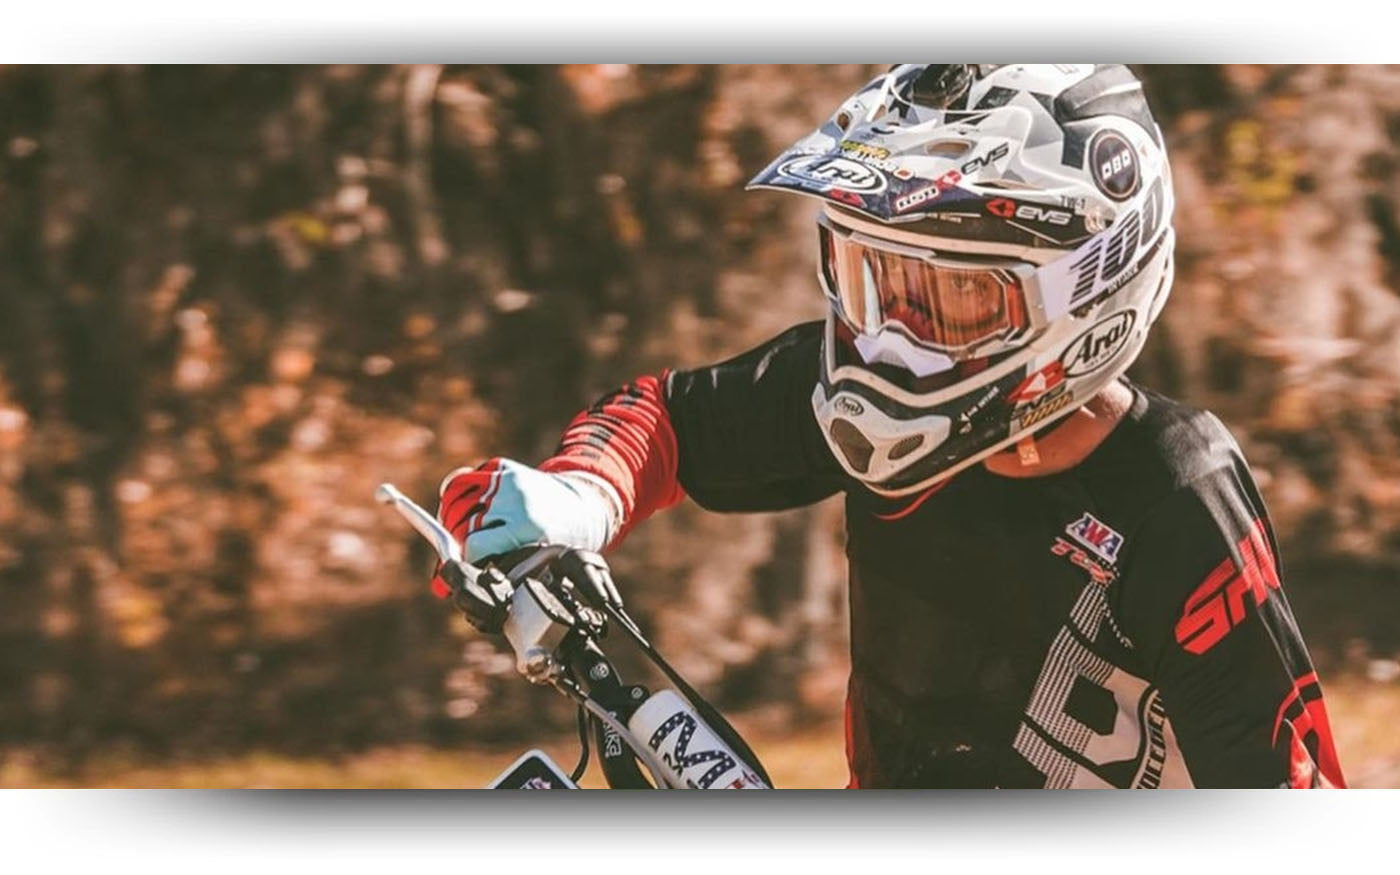 The Privateer Path with Team EVS Athlete Scott Meshey